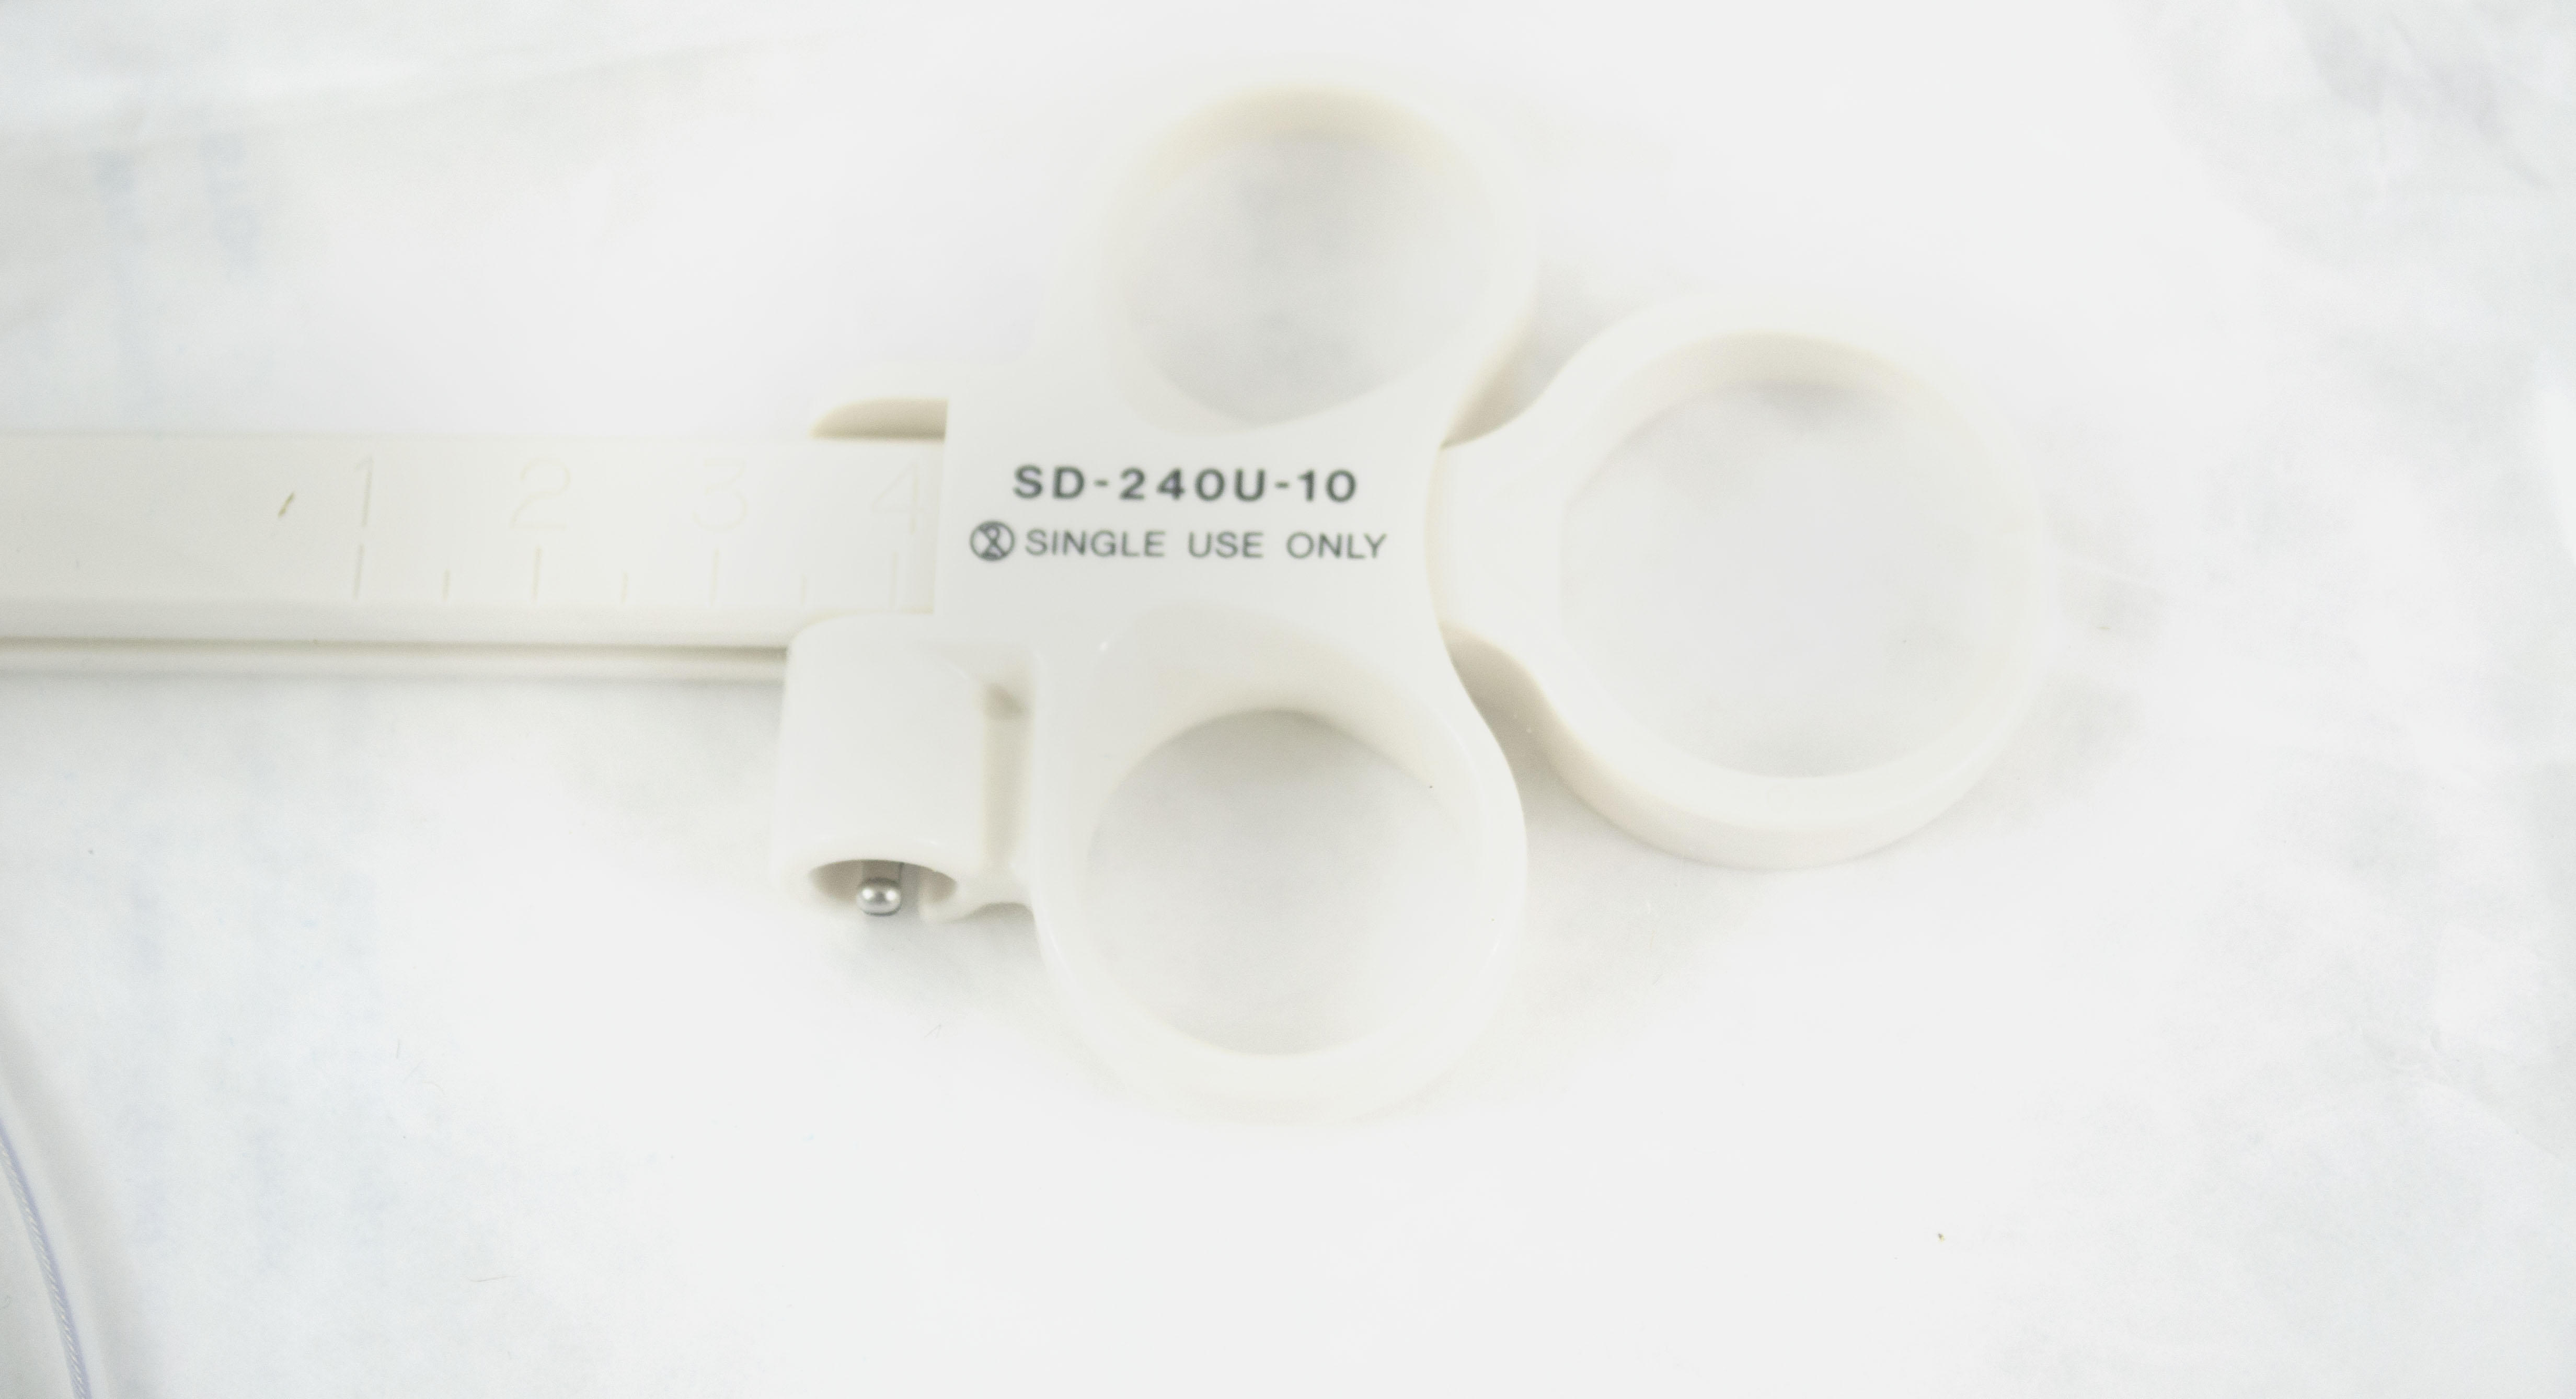 [Out-of-Date] Olympus DIsposable Diathermy Snare - SD-240U-10